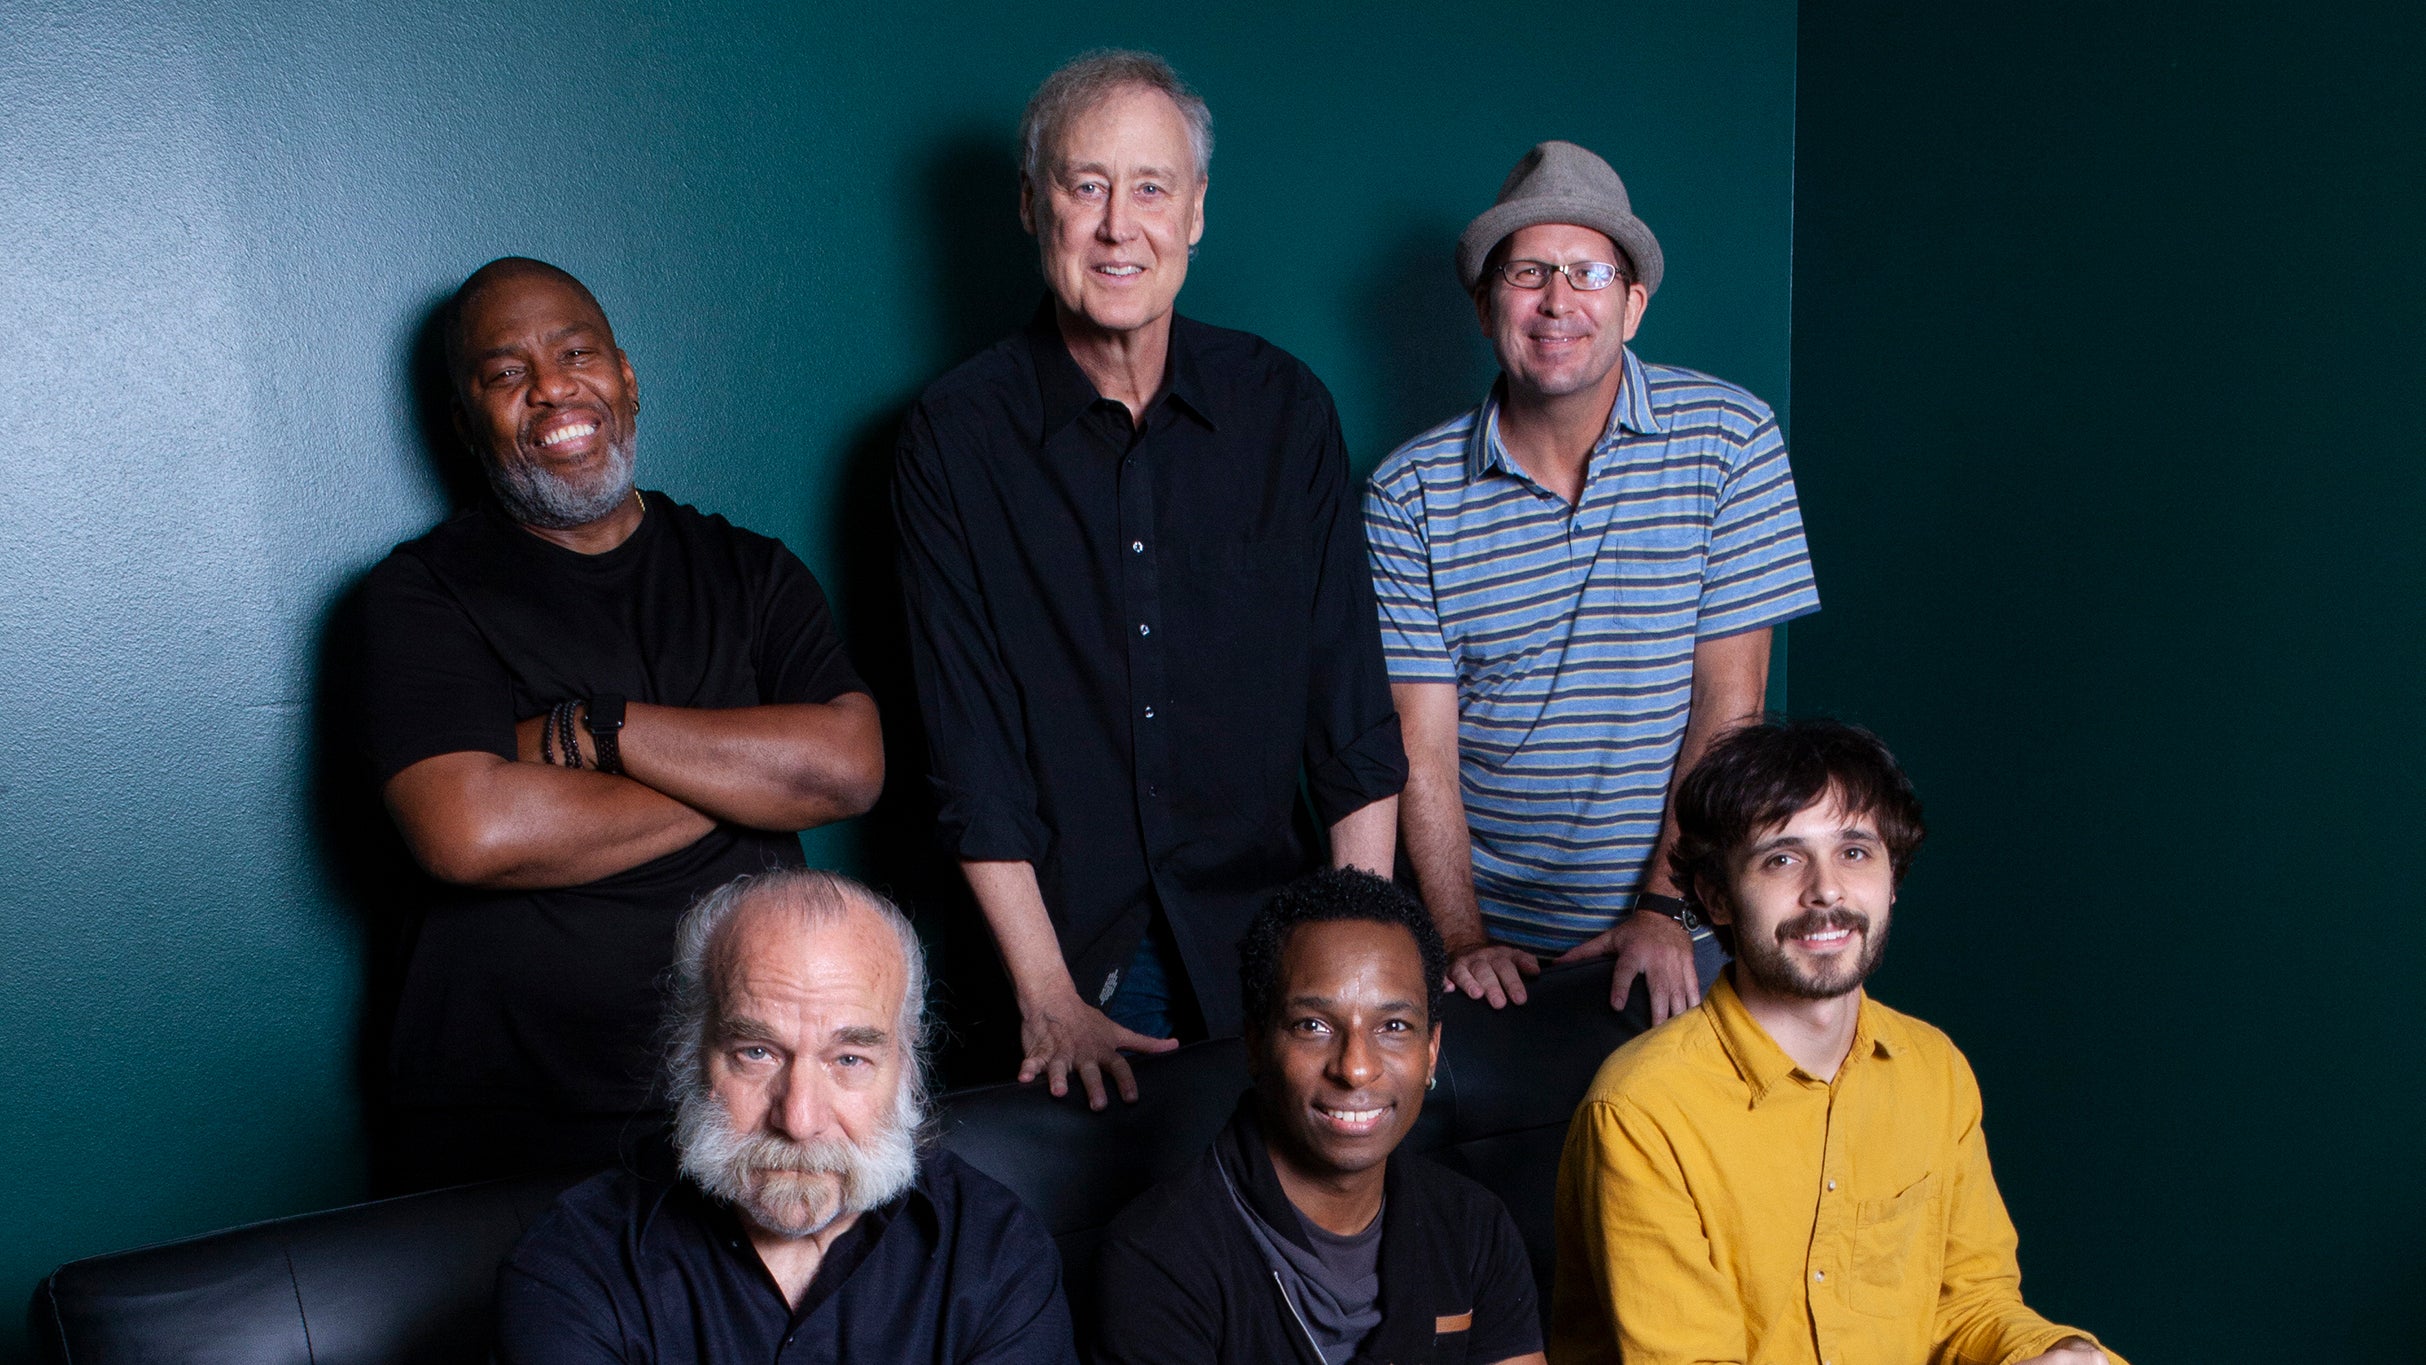 Bruce Hornsby & the Noisemakers - Spirit Trail: 25th Anniversary Tour presale code for approved tickets in Reno